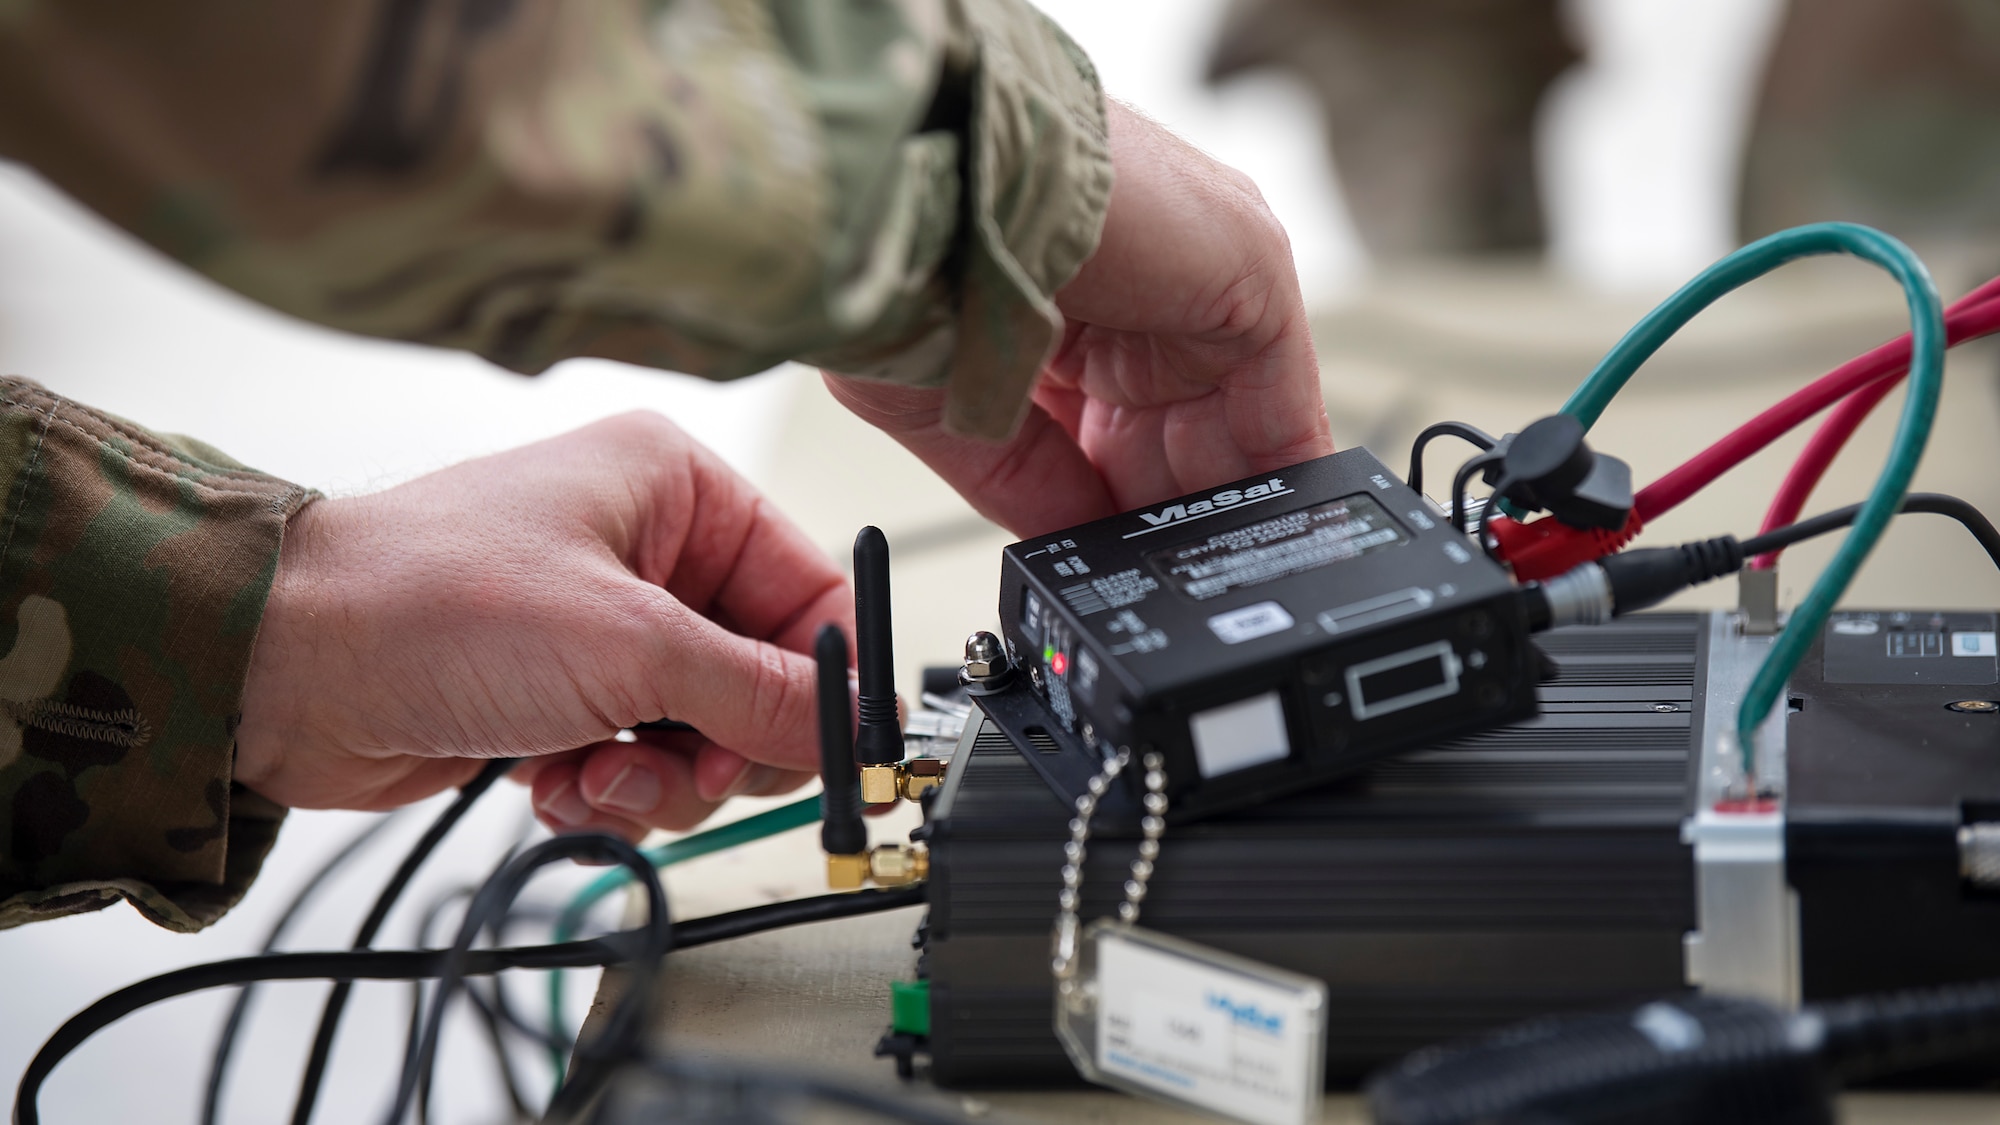 U.S. Army Staff Sgt. Kevin Shells, a Joint Communications Support Element systems team chief, sets up a communications kit at Beer Can Island Jan. 30, 2019, as part of the Cobb Ring exercise. This annual exercise brings together JCSE and their British counterparts, the 30th Signal Regiment, to strengthen relationships and interoperability between the two allies.